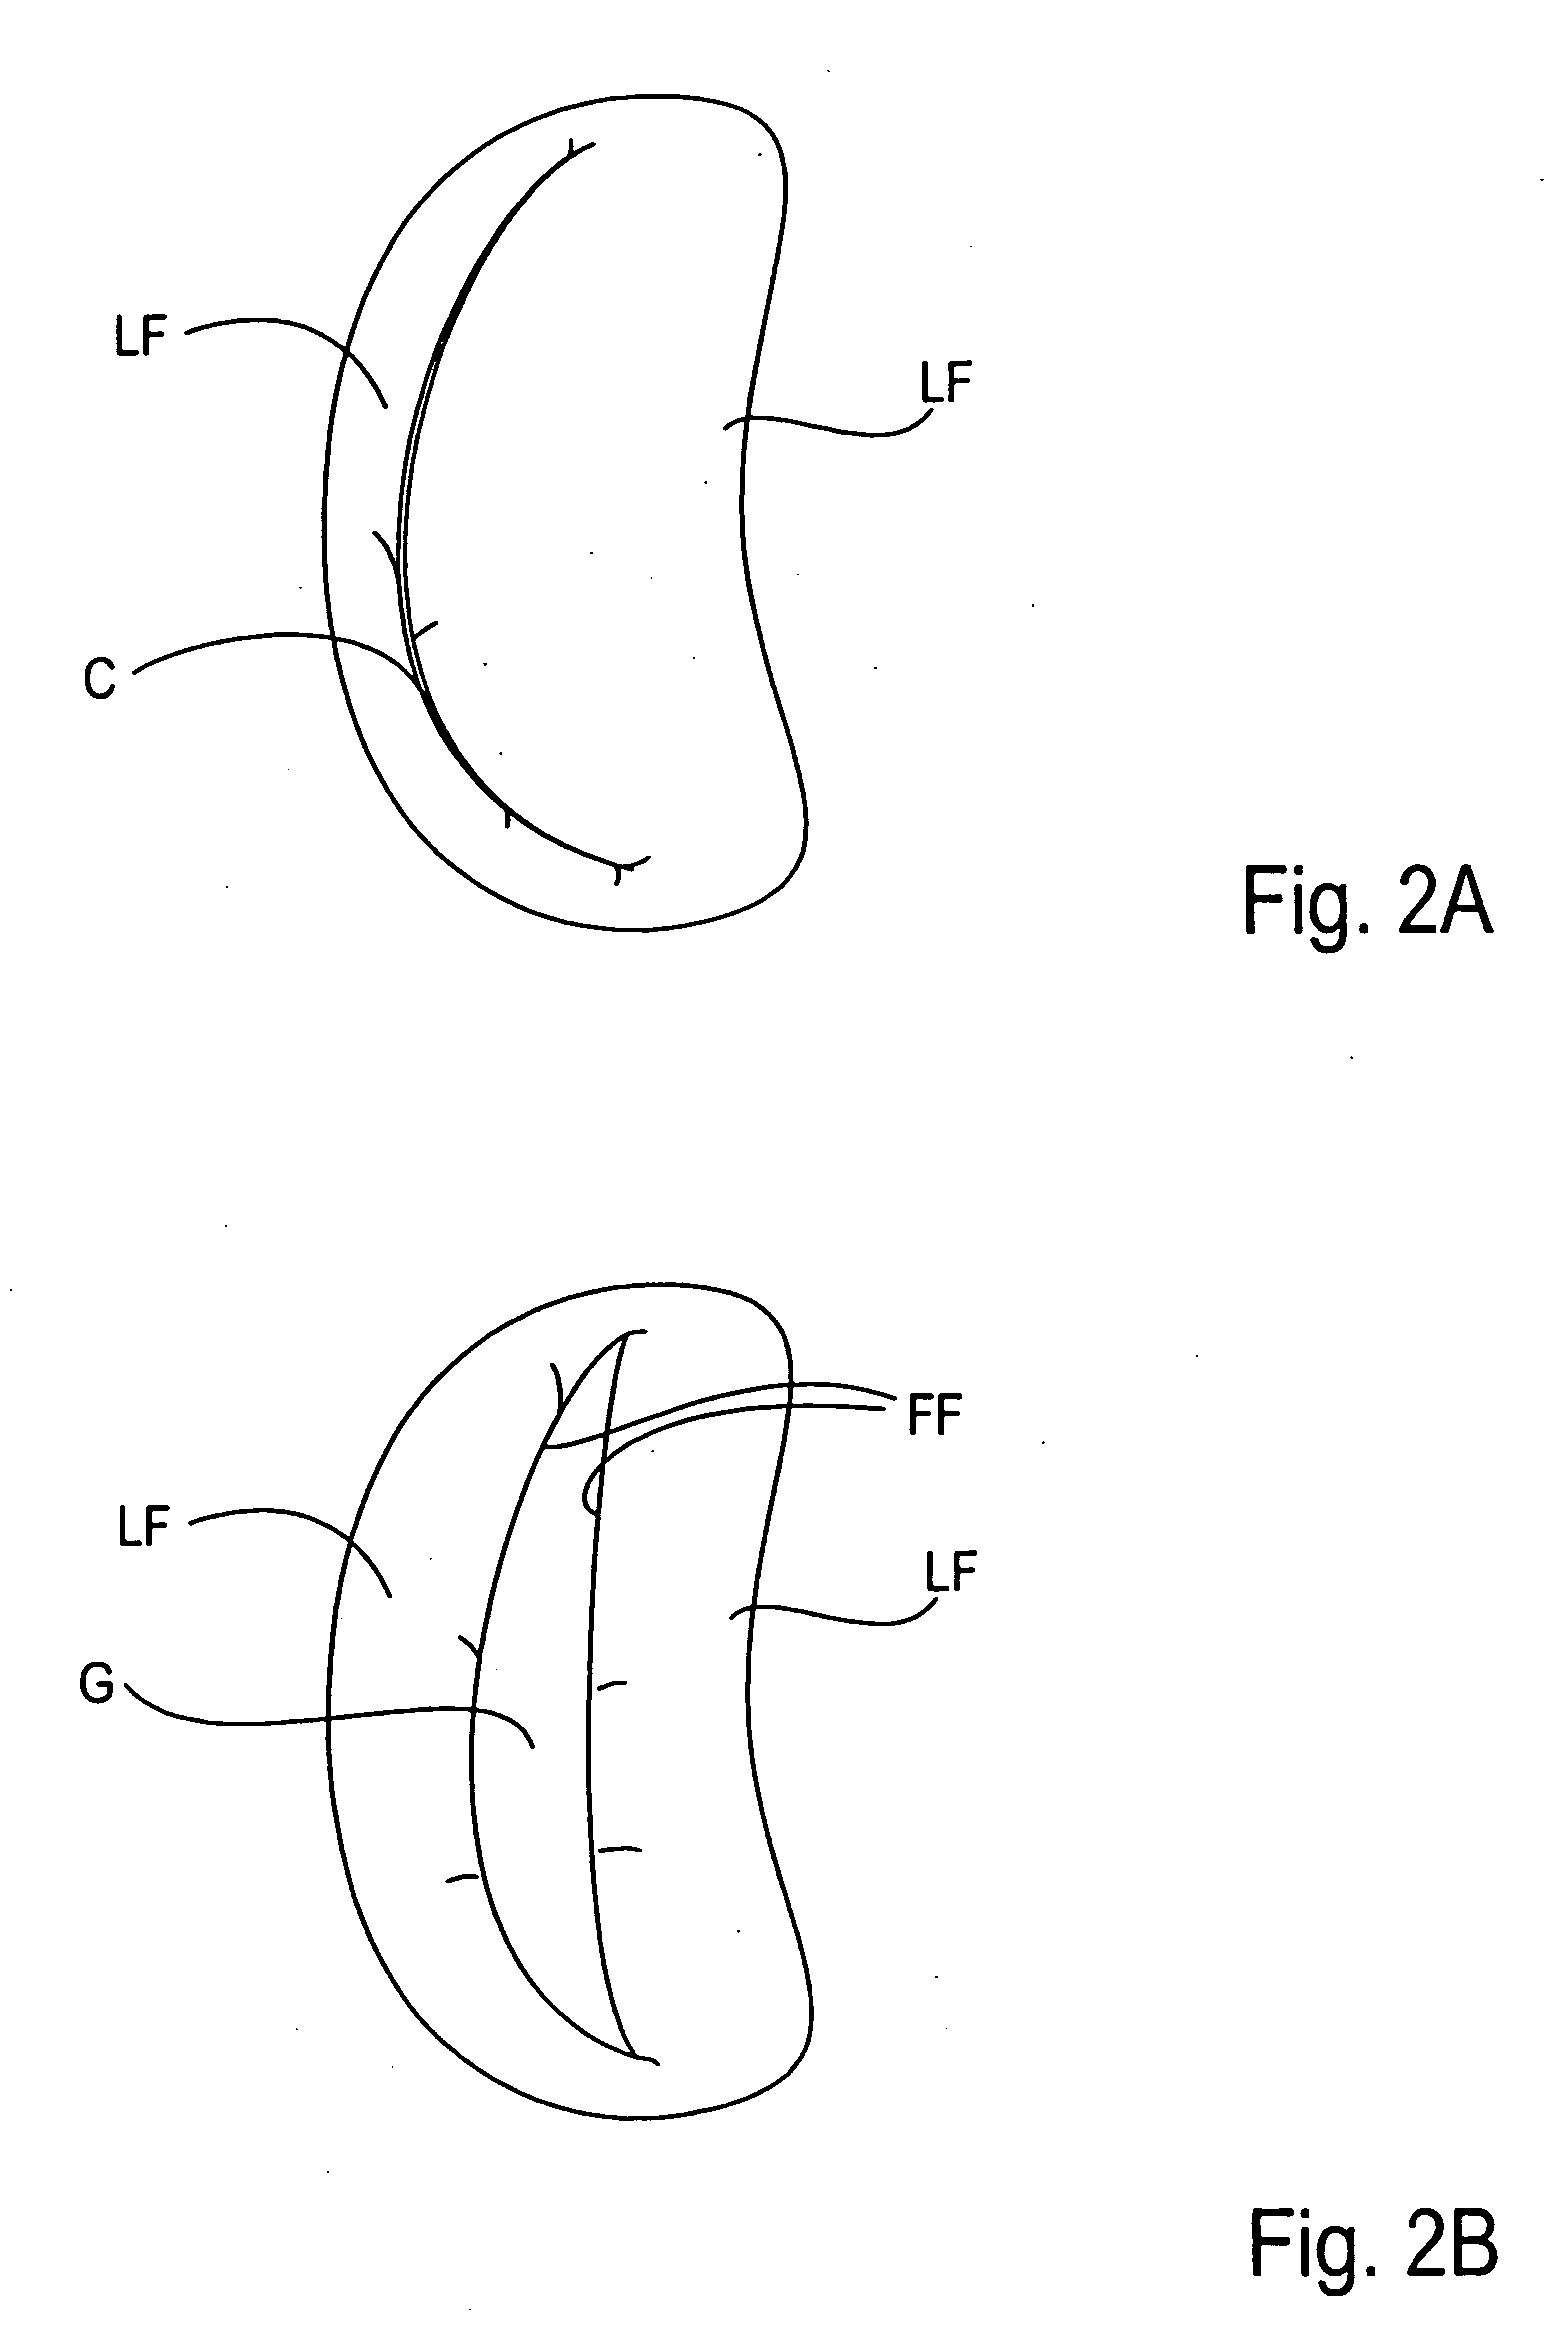 Methods and devices for capturing and fixing leaflets in valve repair